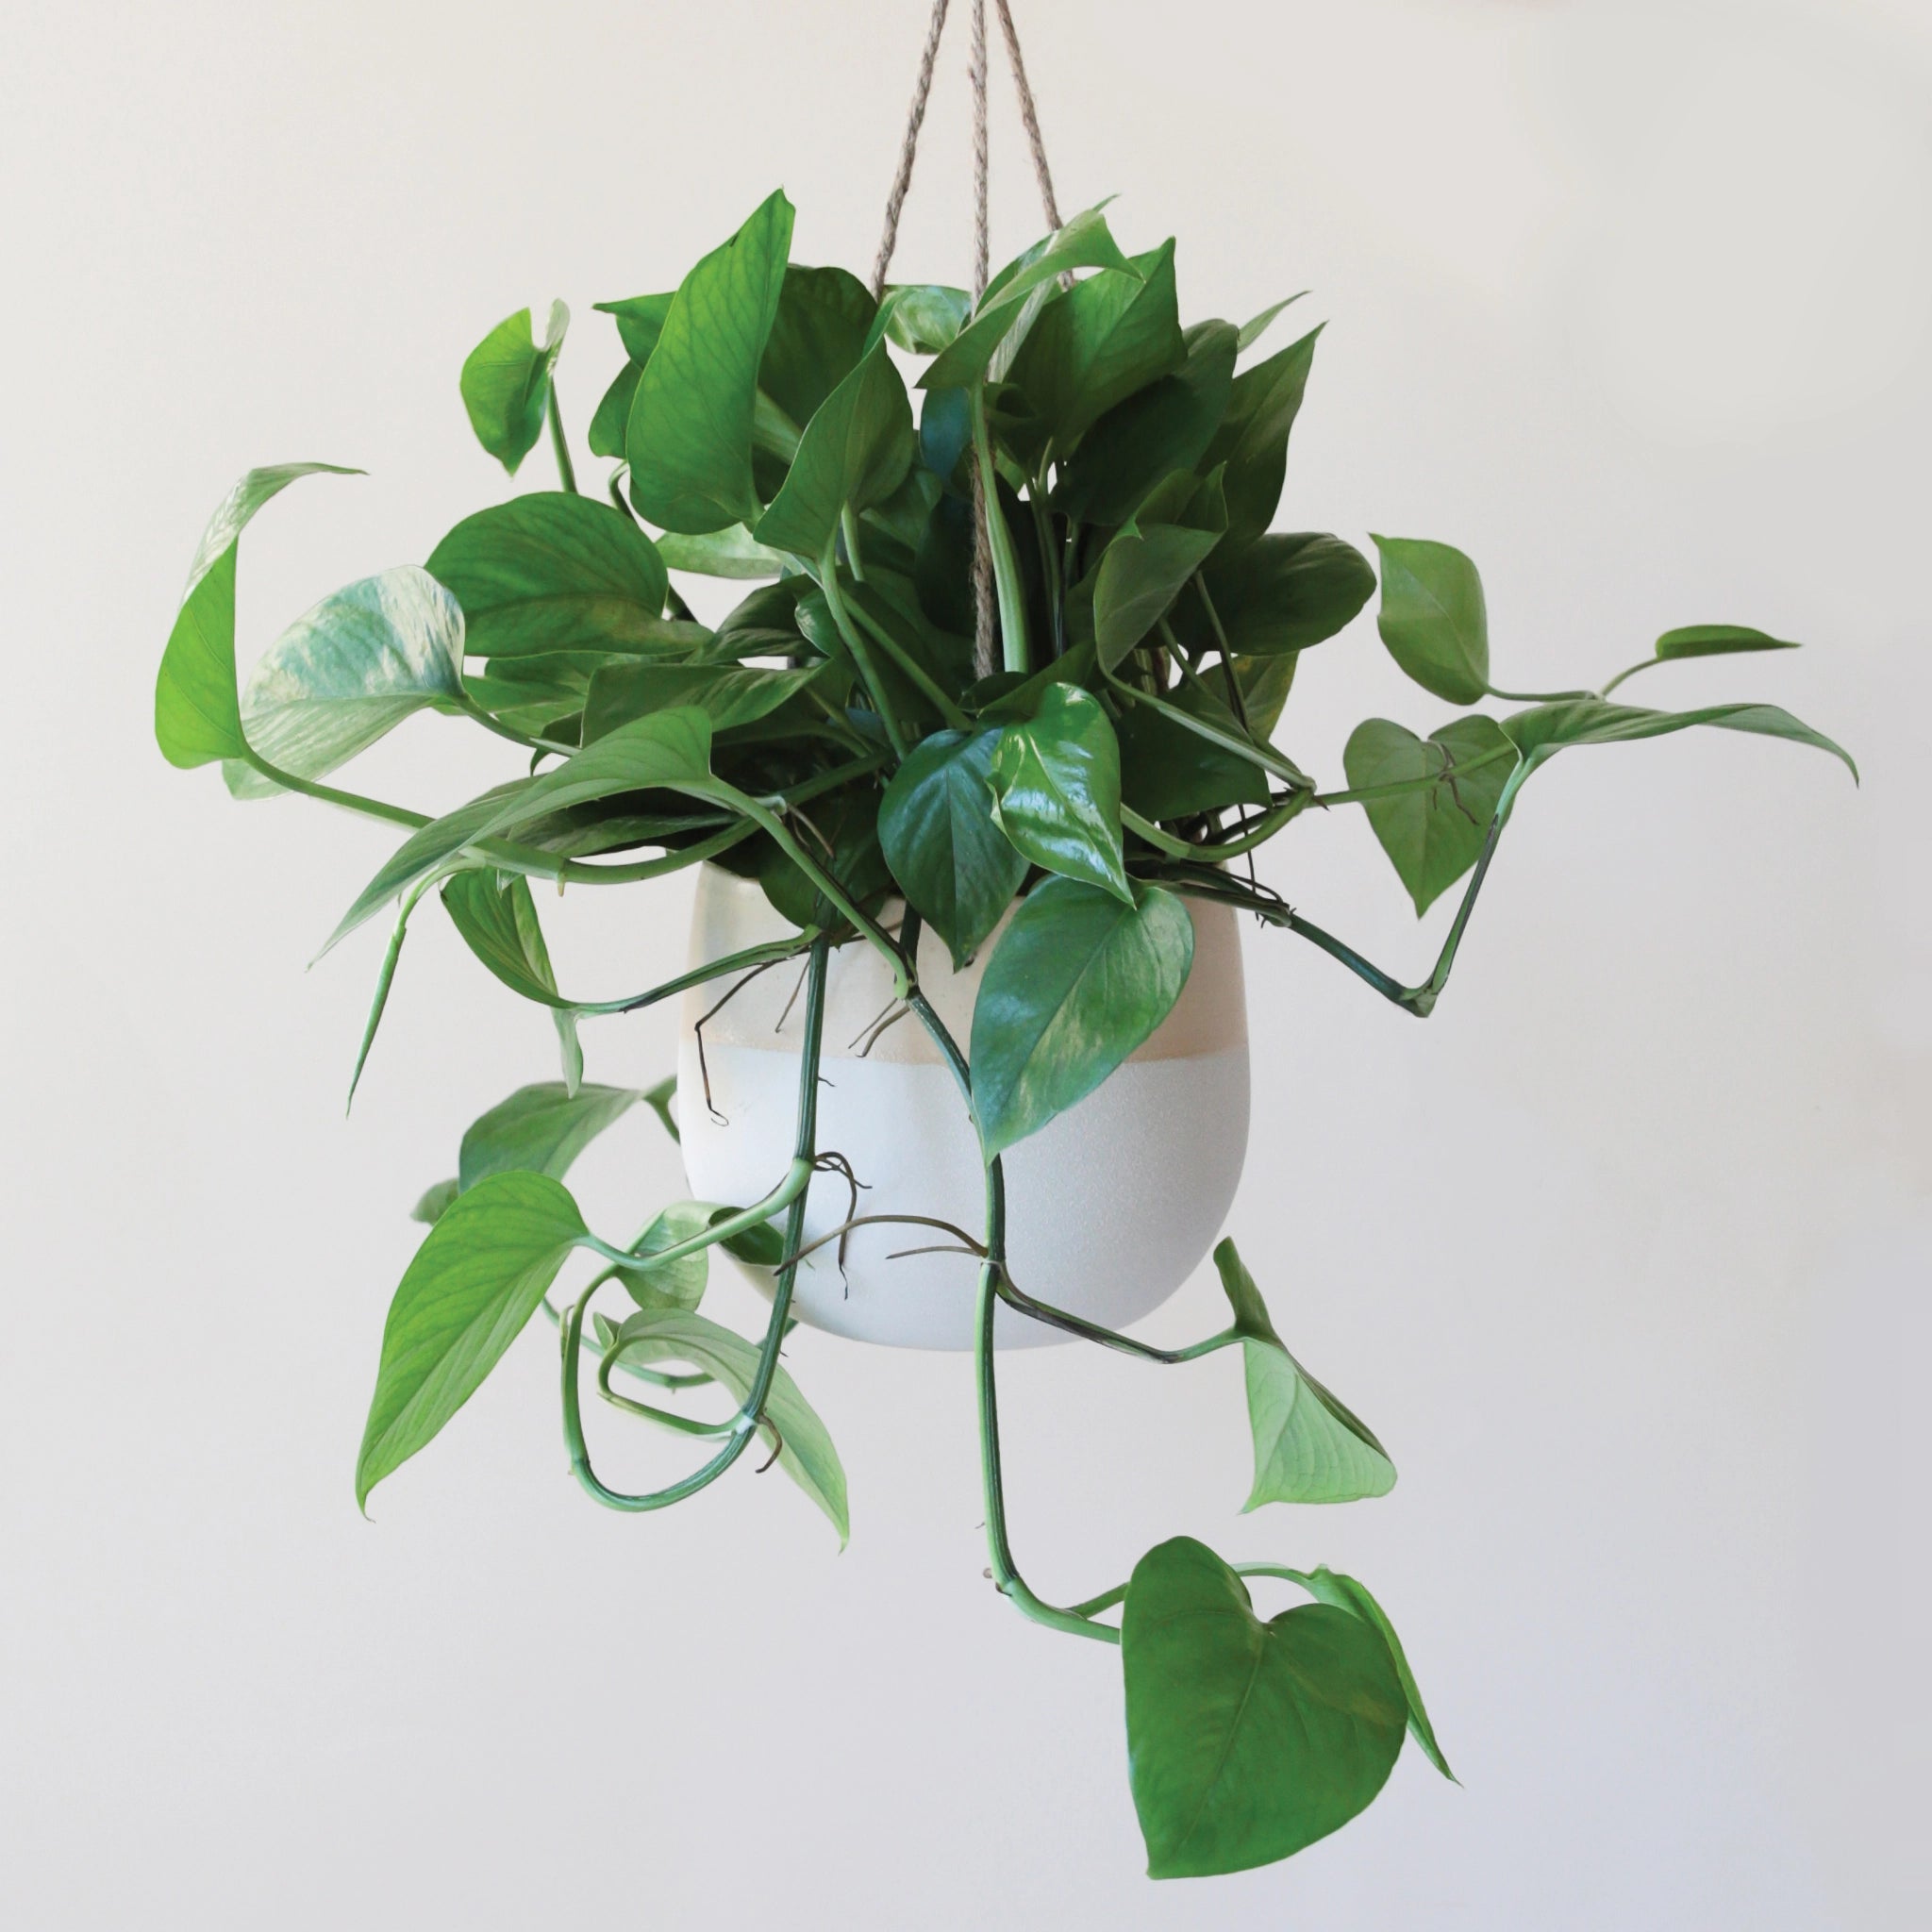 The larger neutral ceramic hanging planter with rounded sides and a flat bottom along with a half cream half tan design and three jute strings as the hangers and photographed with a green viney house plant.